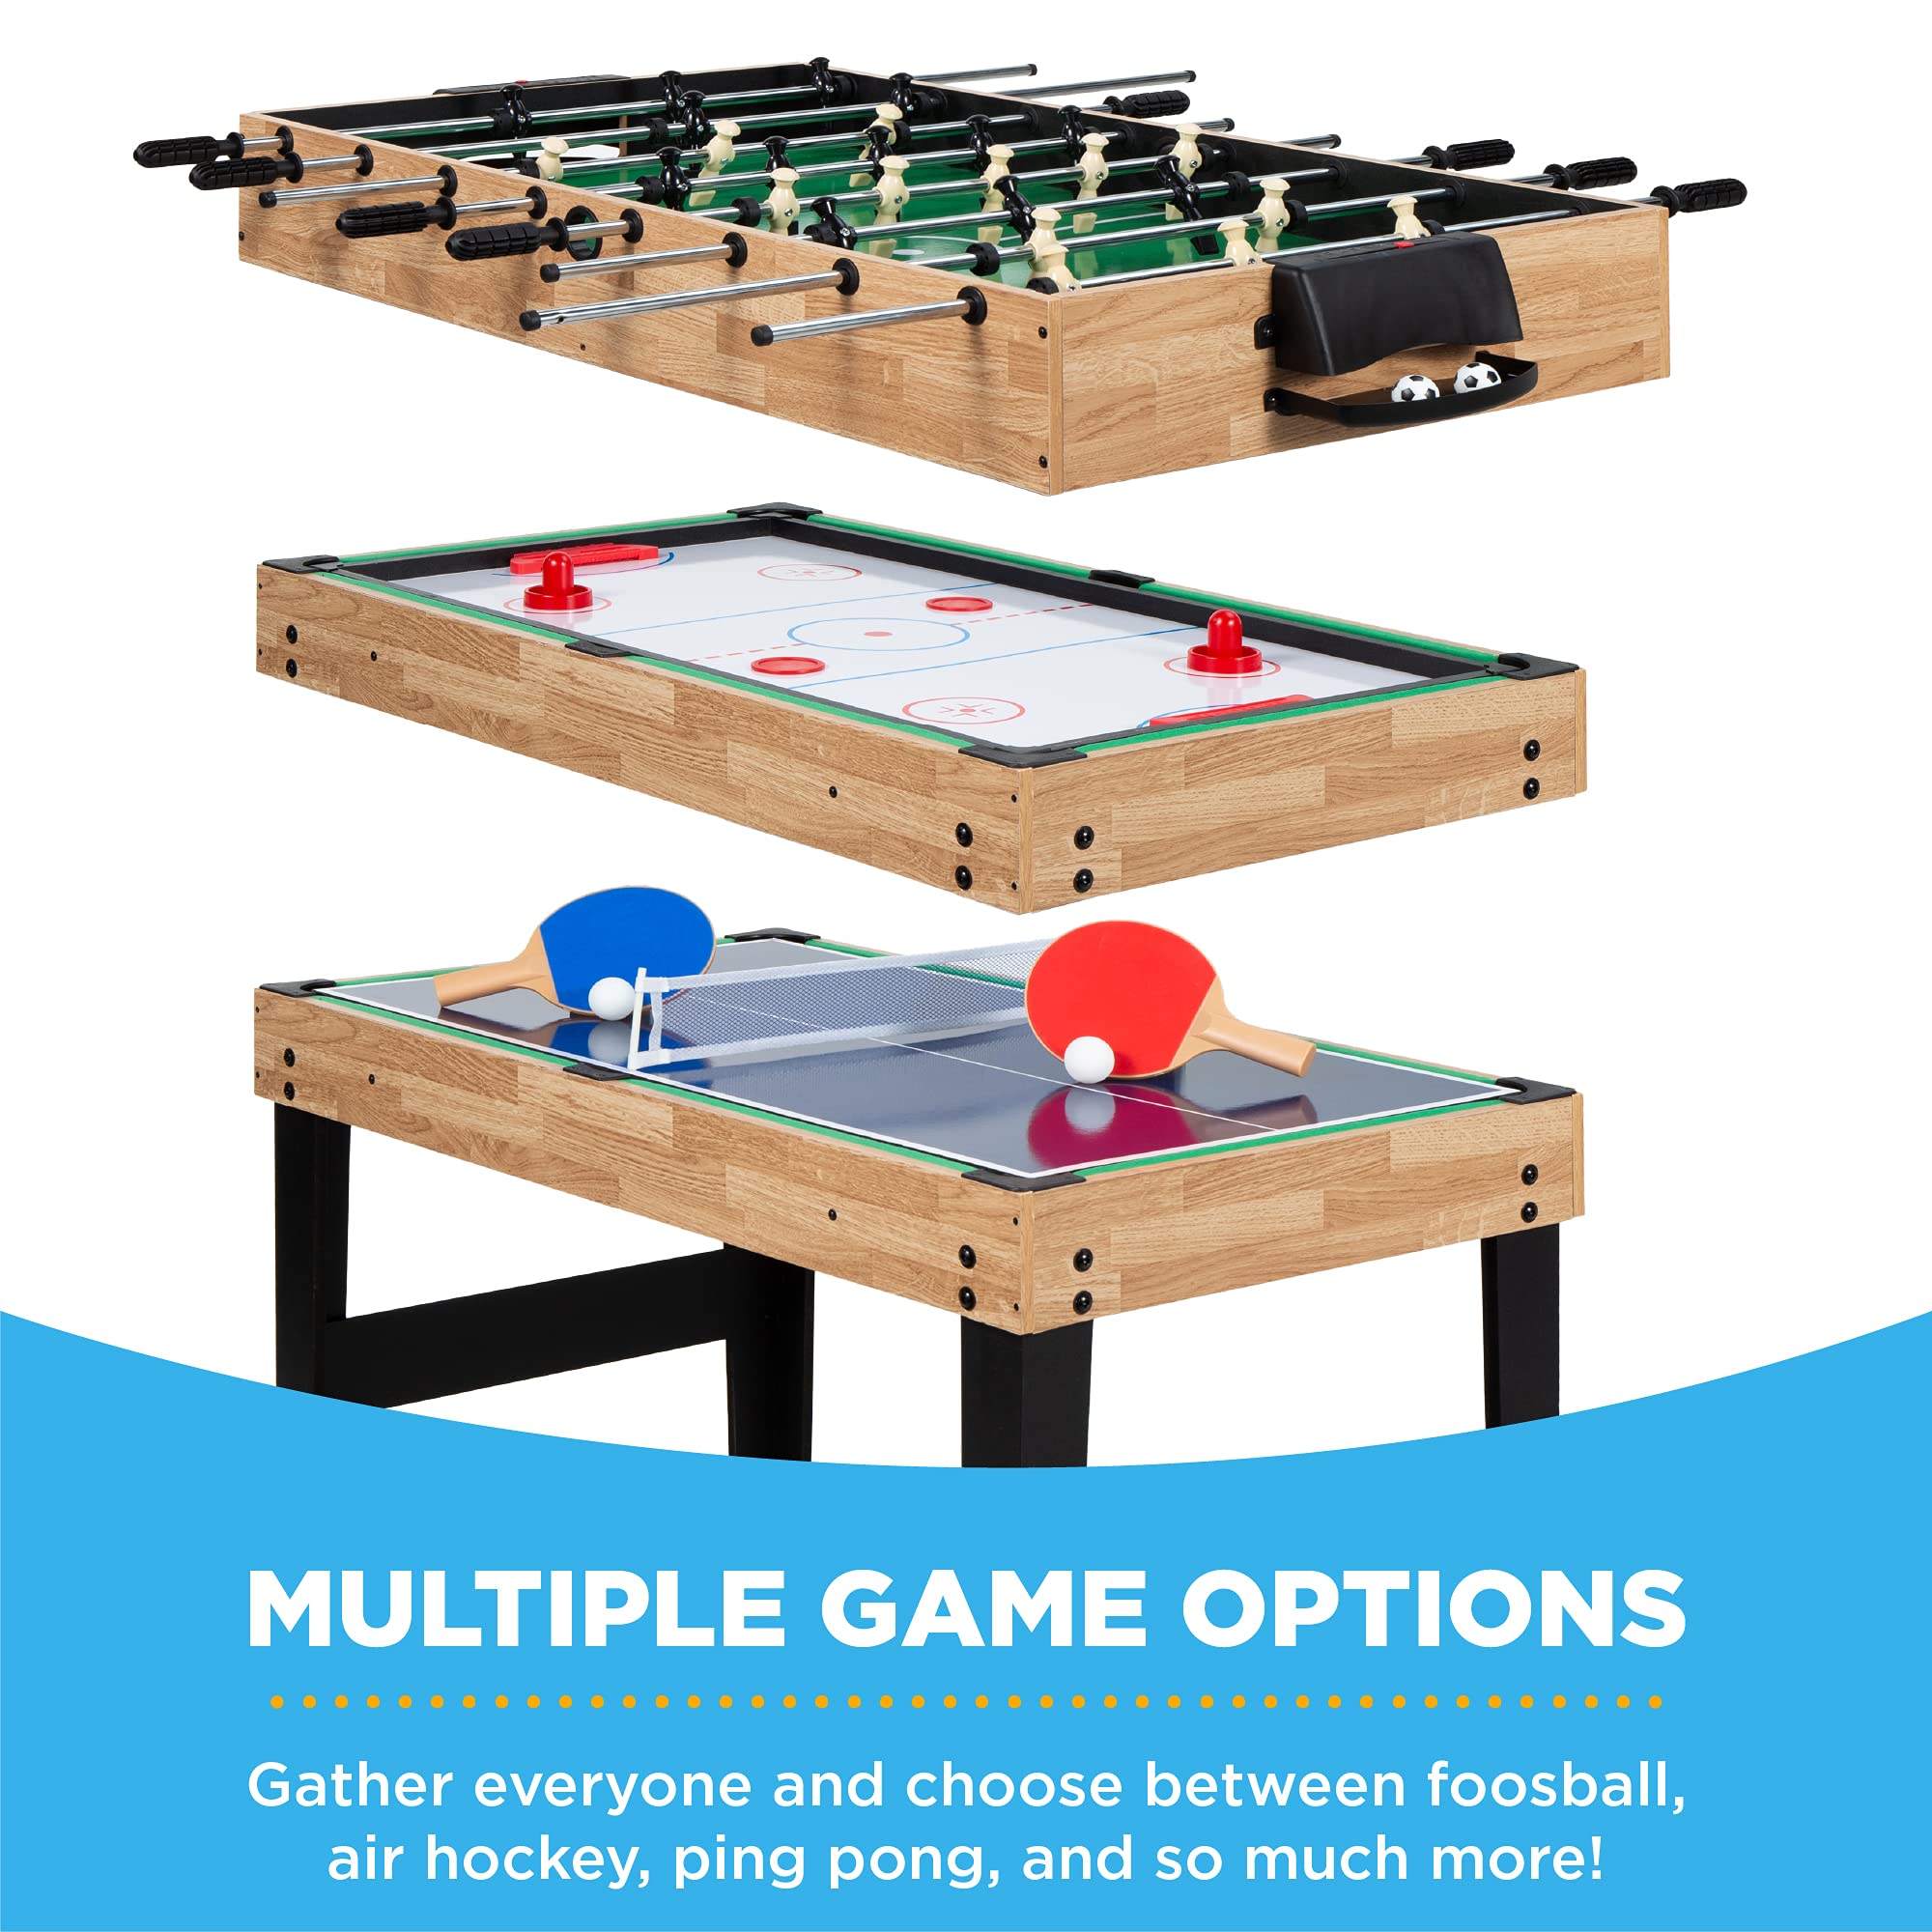 Best Choice Products 2x4ft 10-in-1 Combo Game Table Set for Home, Game Room, Friends & Family w/Hockey, Foosball, Pool, Shuffleboard, Ping Pong, Chess, Checkers, Bowling, and Backgammon - Natural